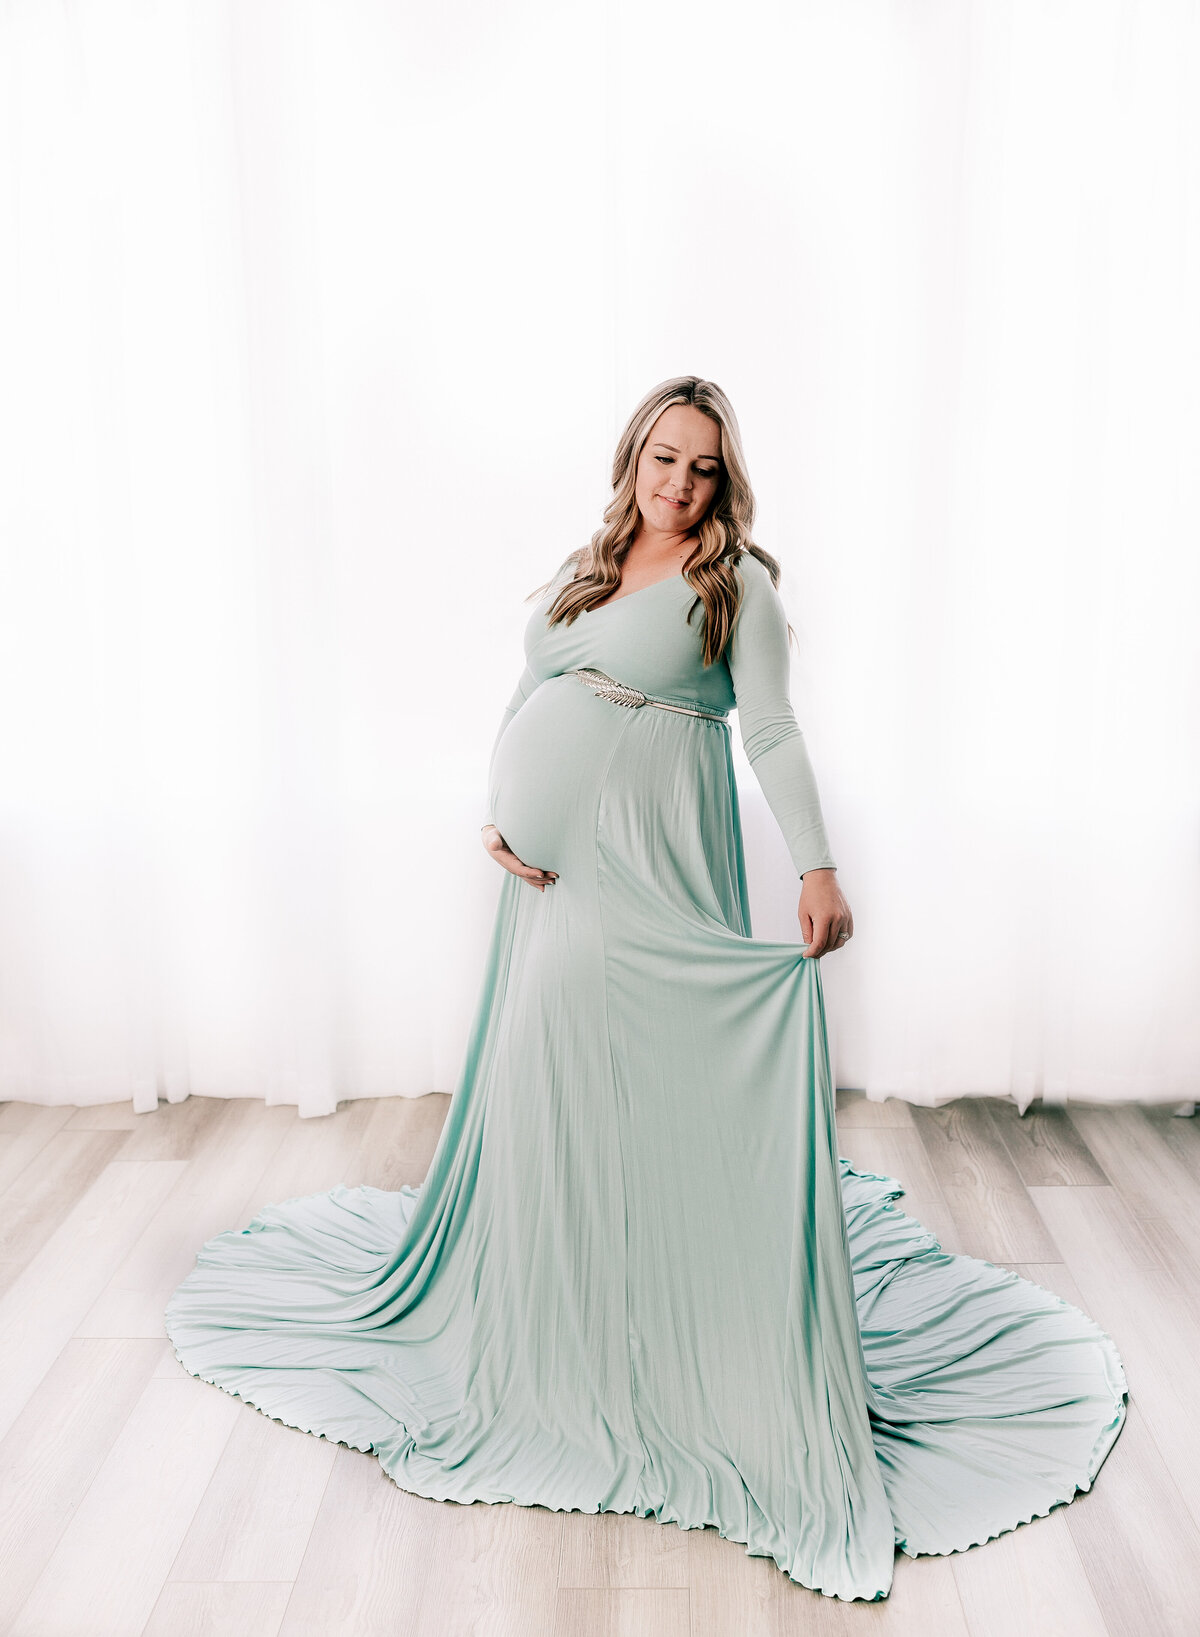 Flowy mint maternity gown in a studio maternity session in Utah.